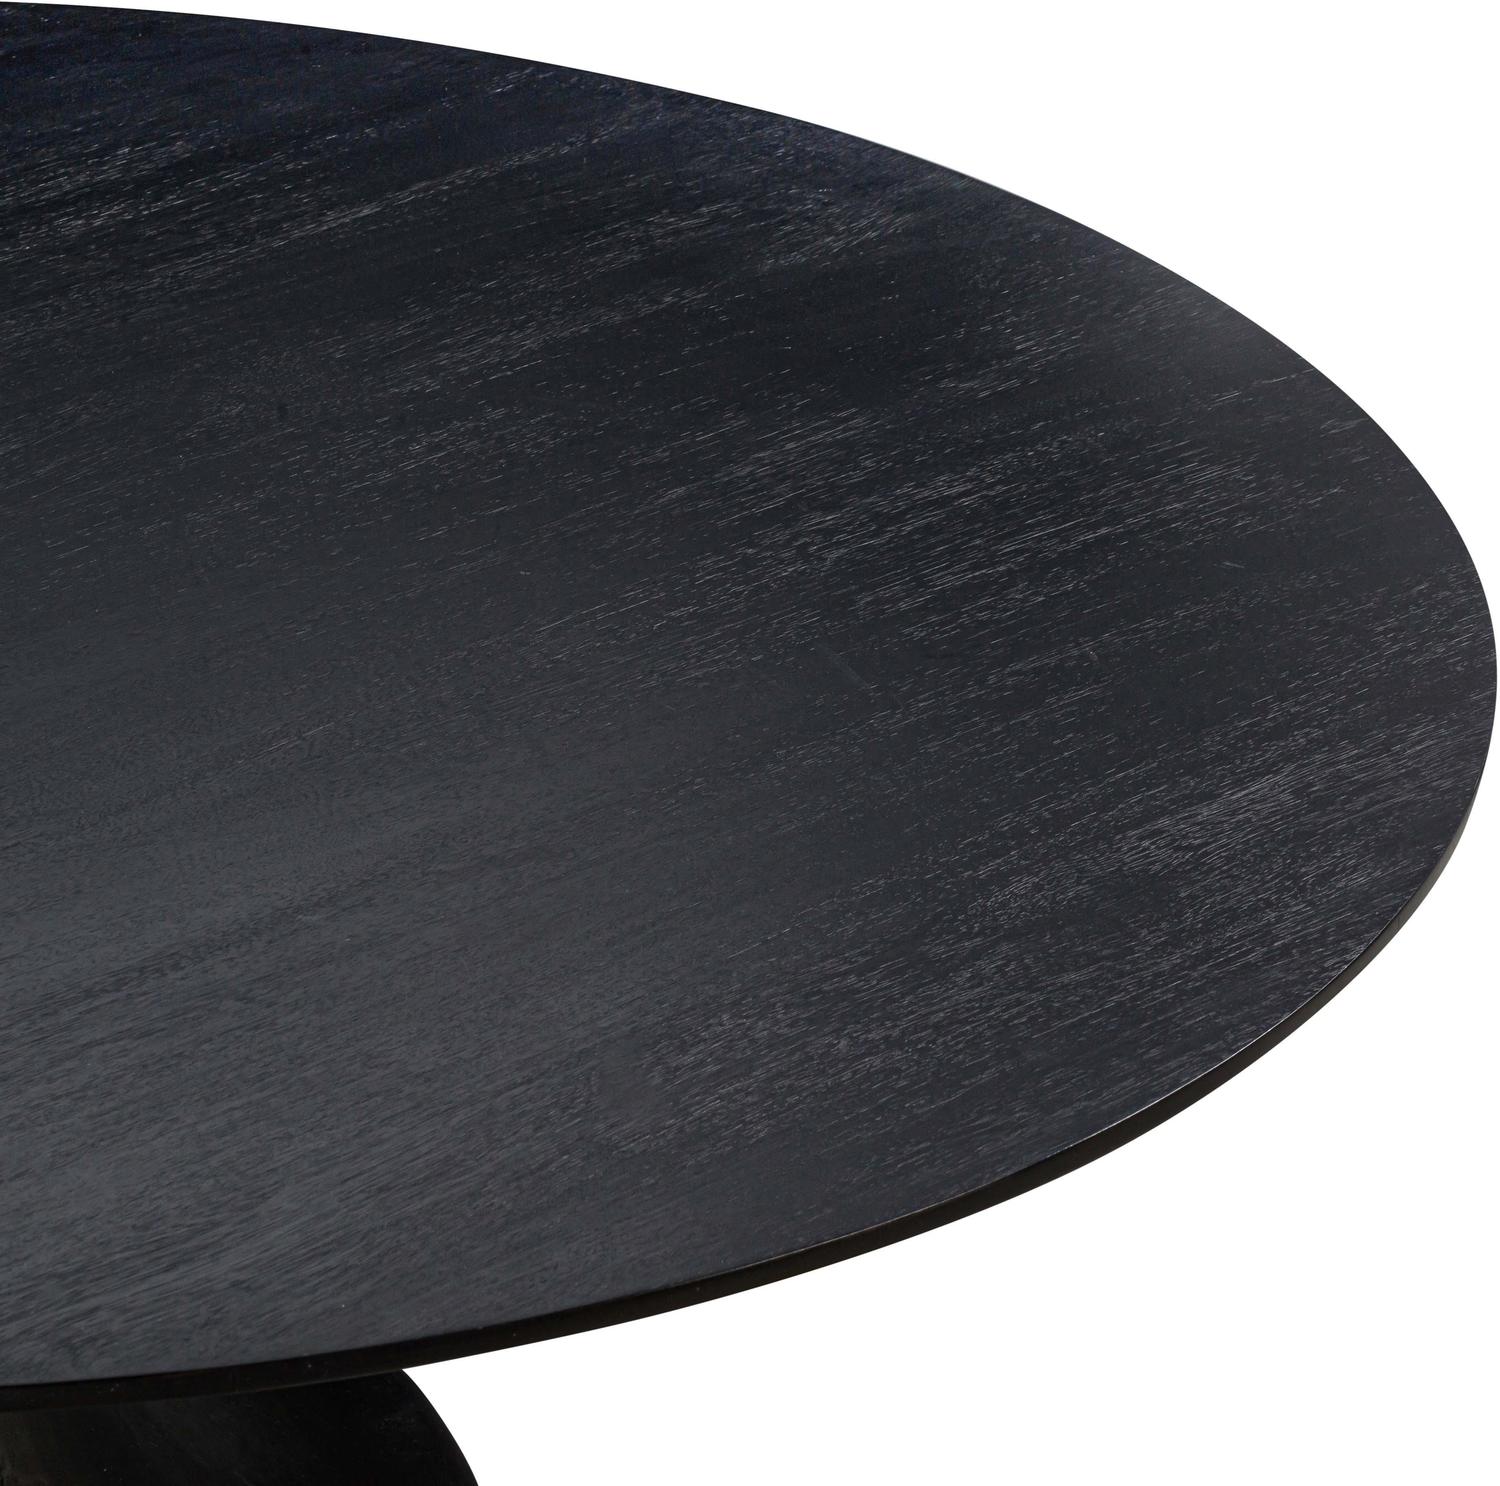 grey round extendable dining table Tov Furniture Dining Tables Black